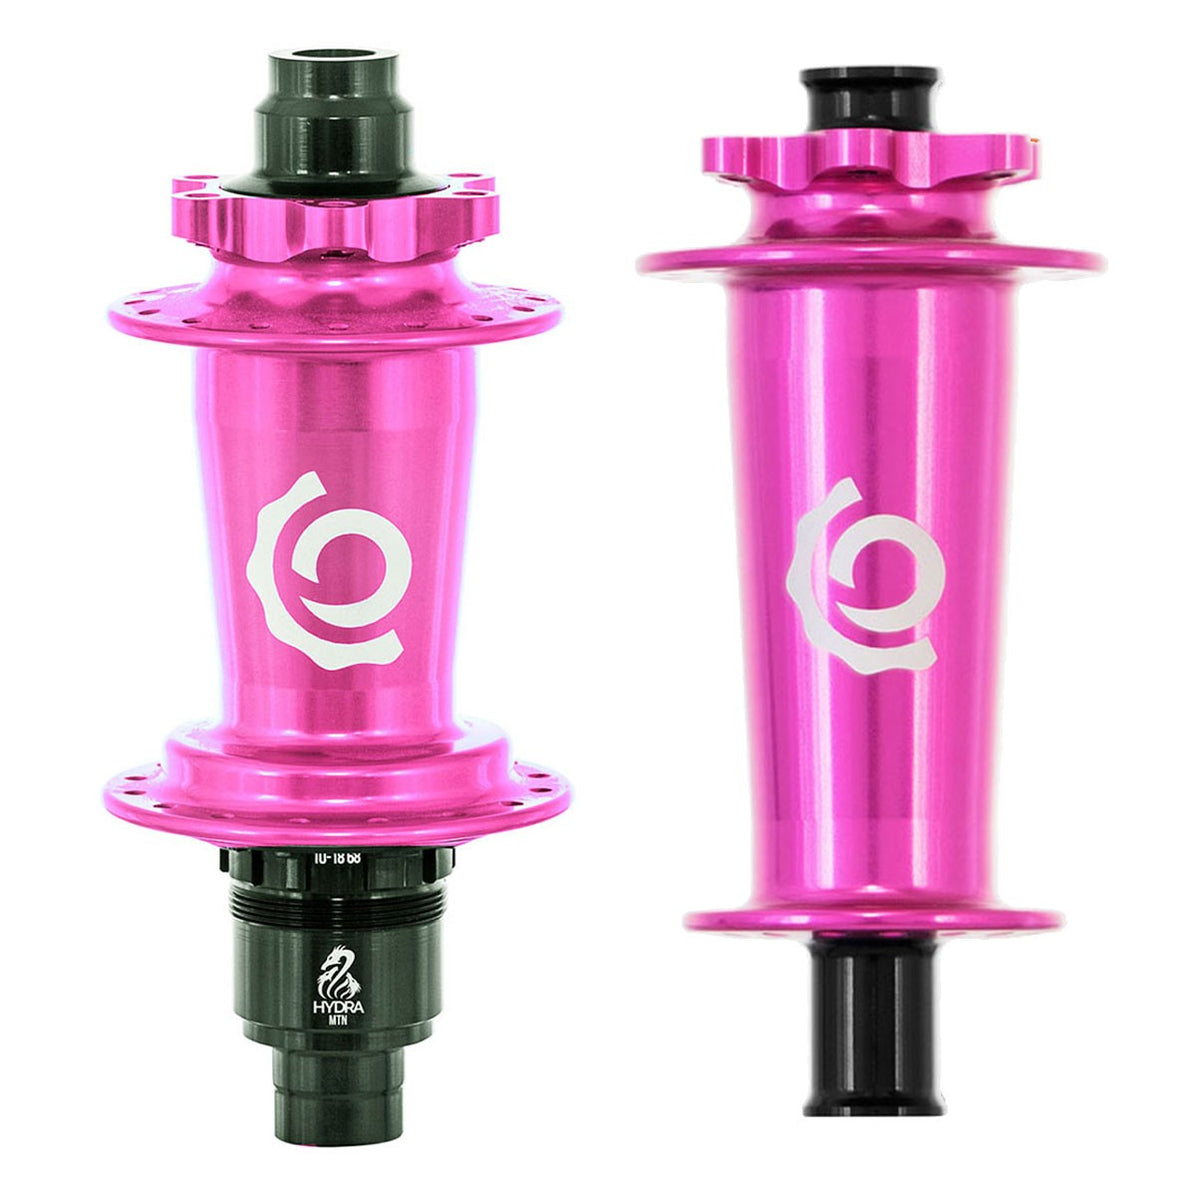 Industry Nine Hydra Classic 32h 6 Bolt Pink Hubset